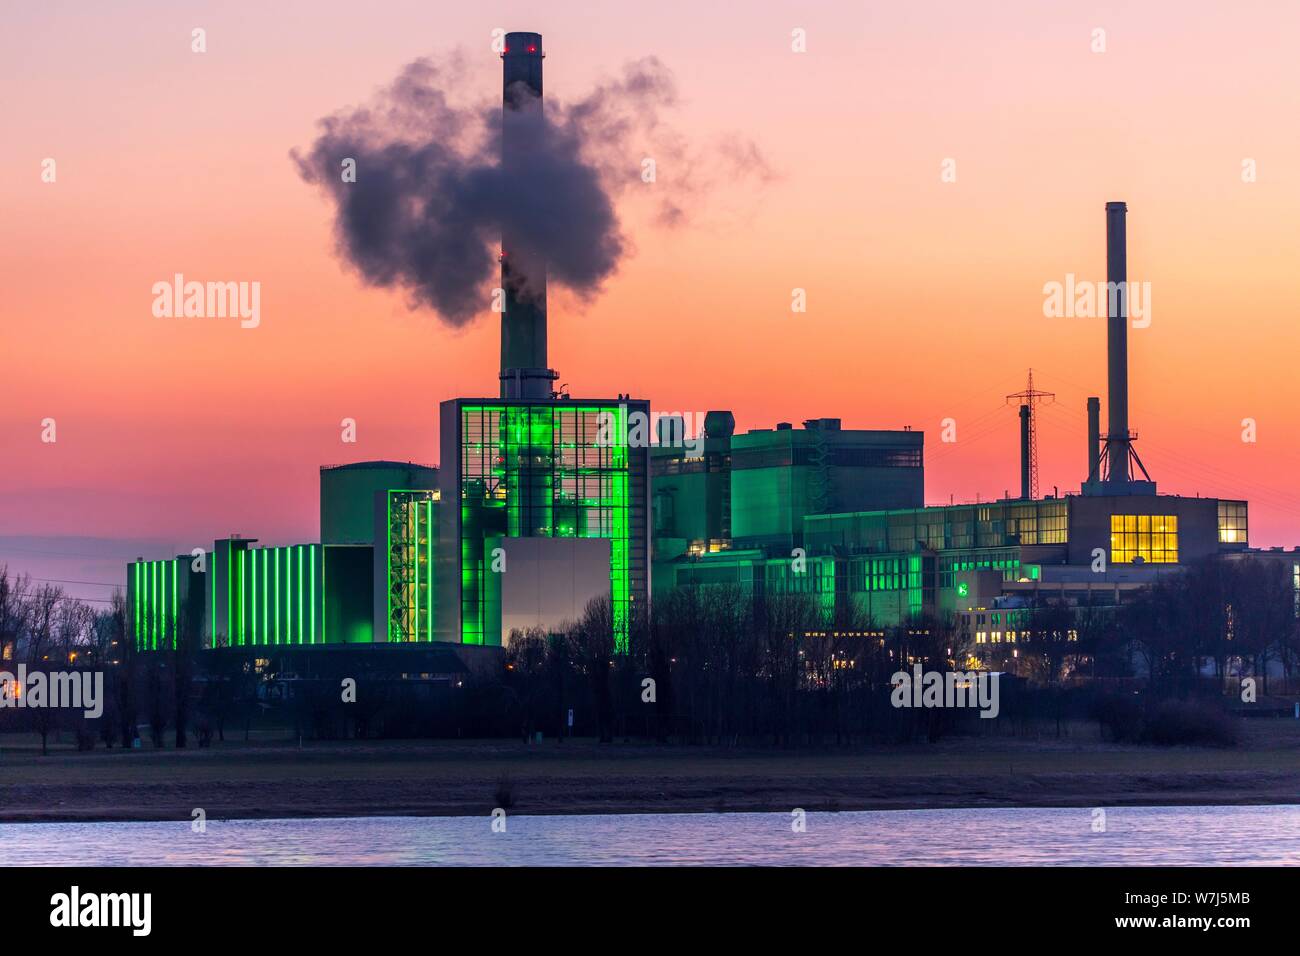 Lausward combined heat and power plant, gas and steam turbine power plant, Fortuna power plant unit, Dusseldorf, Germany Stock Photo